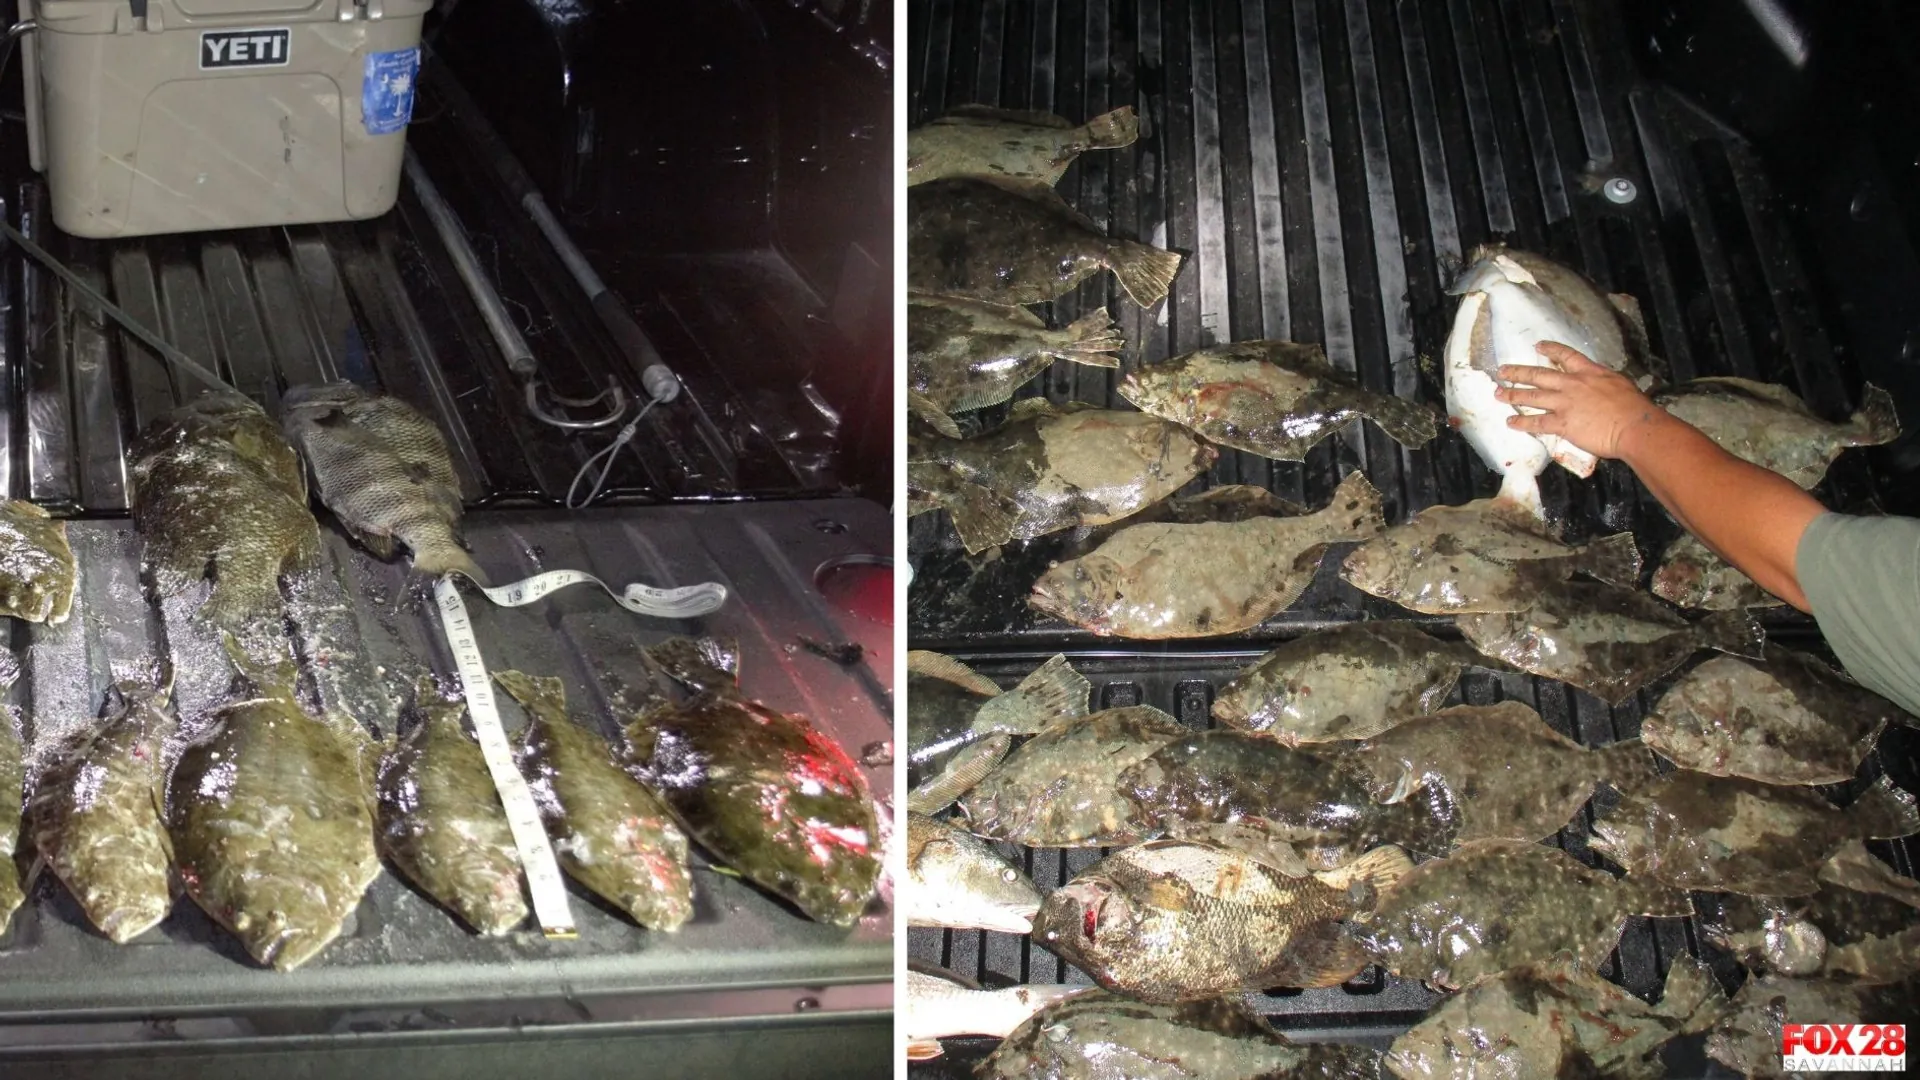 Officials say they gave an unusual haul of fish illegally caught in Georgia to a family in need